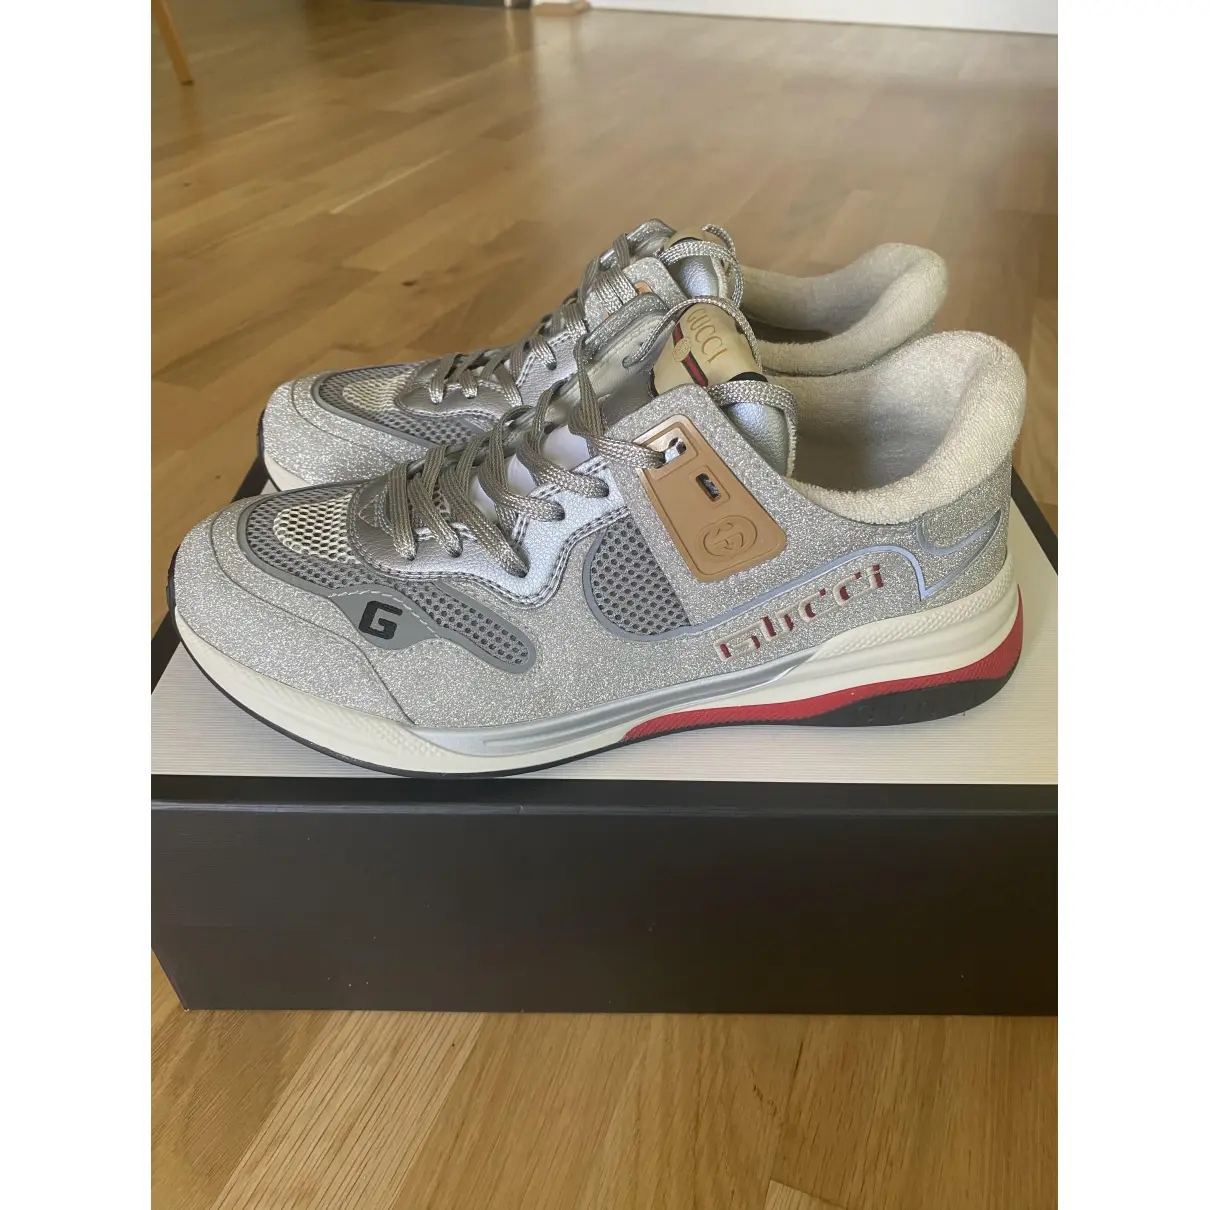 Buy Gucci Ultrapace leather low trainers online